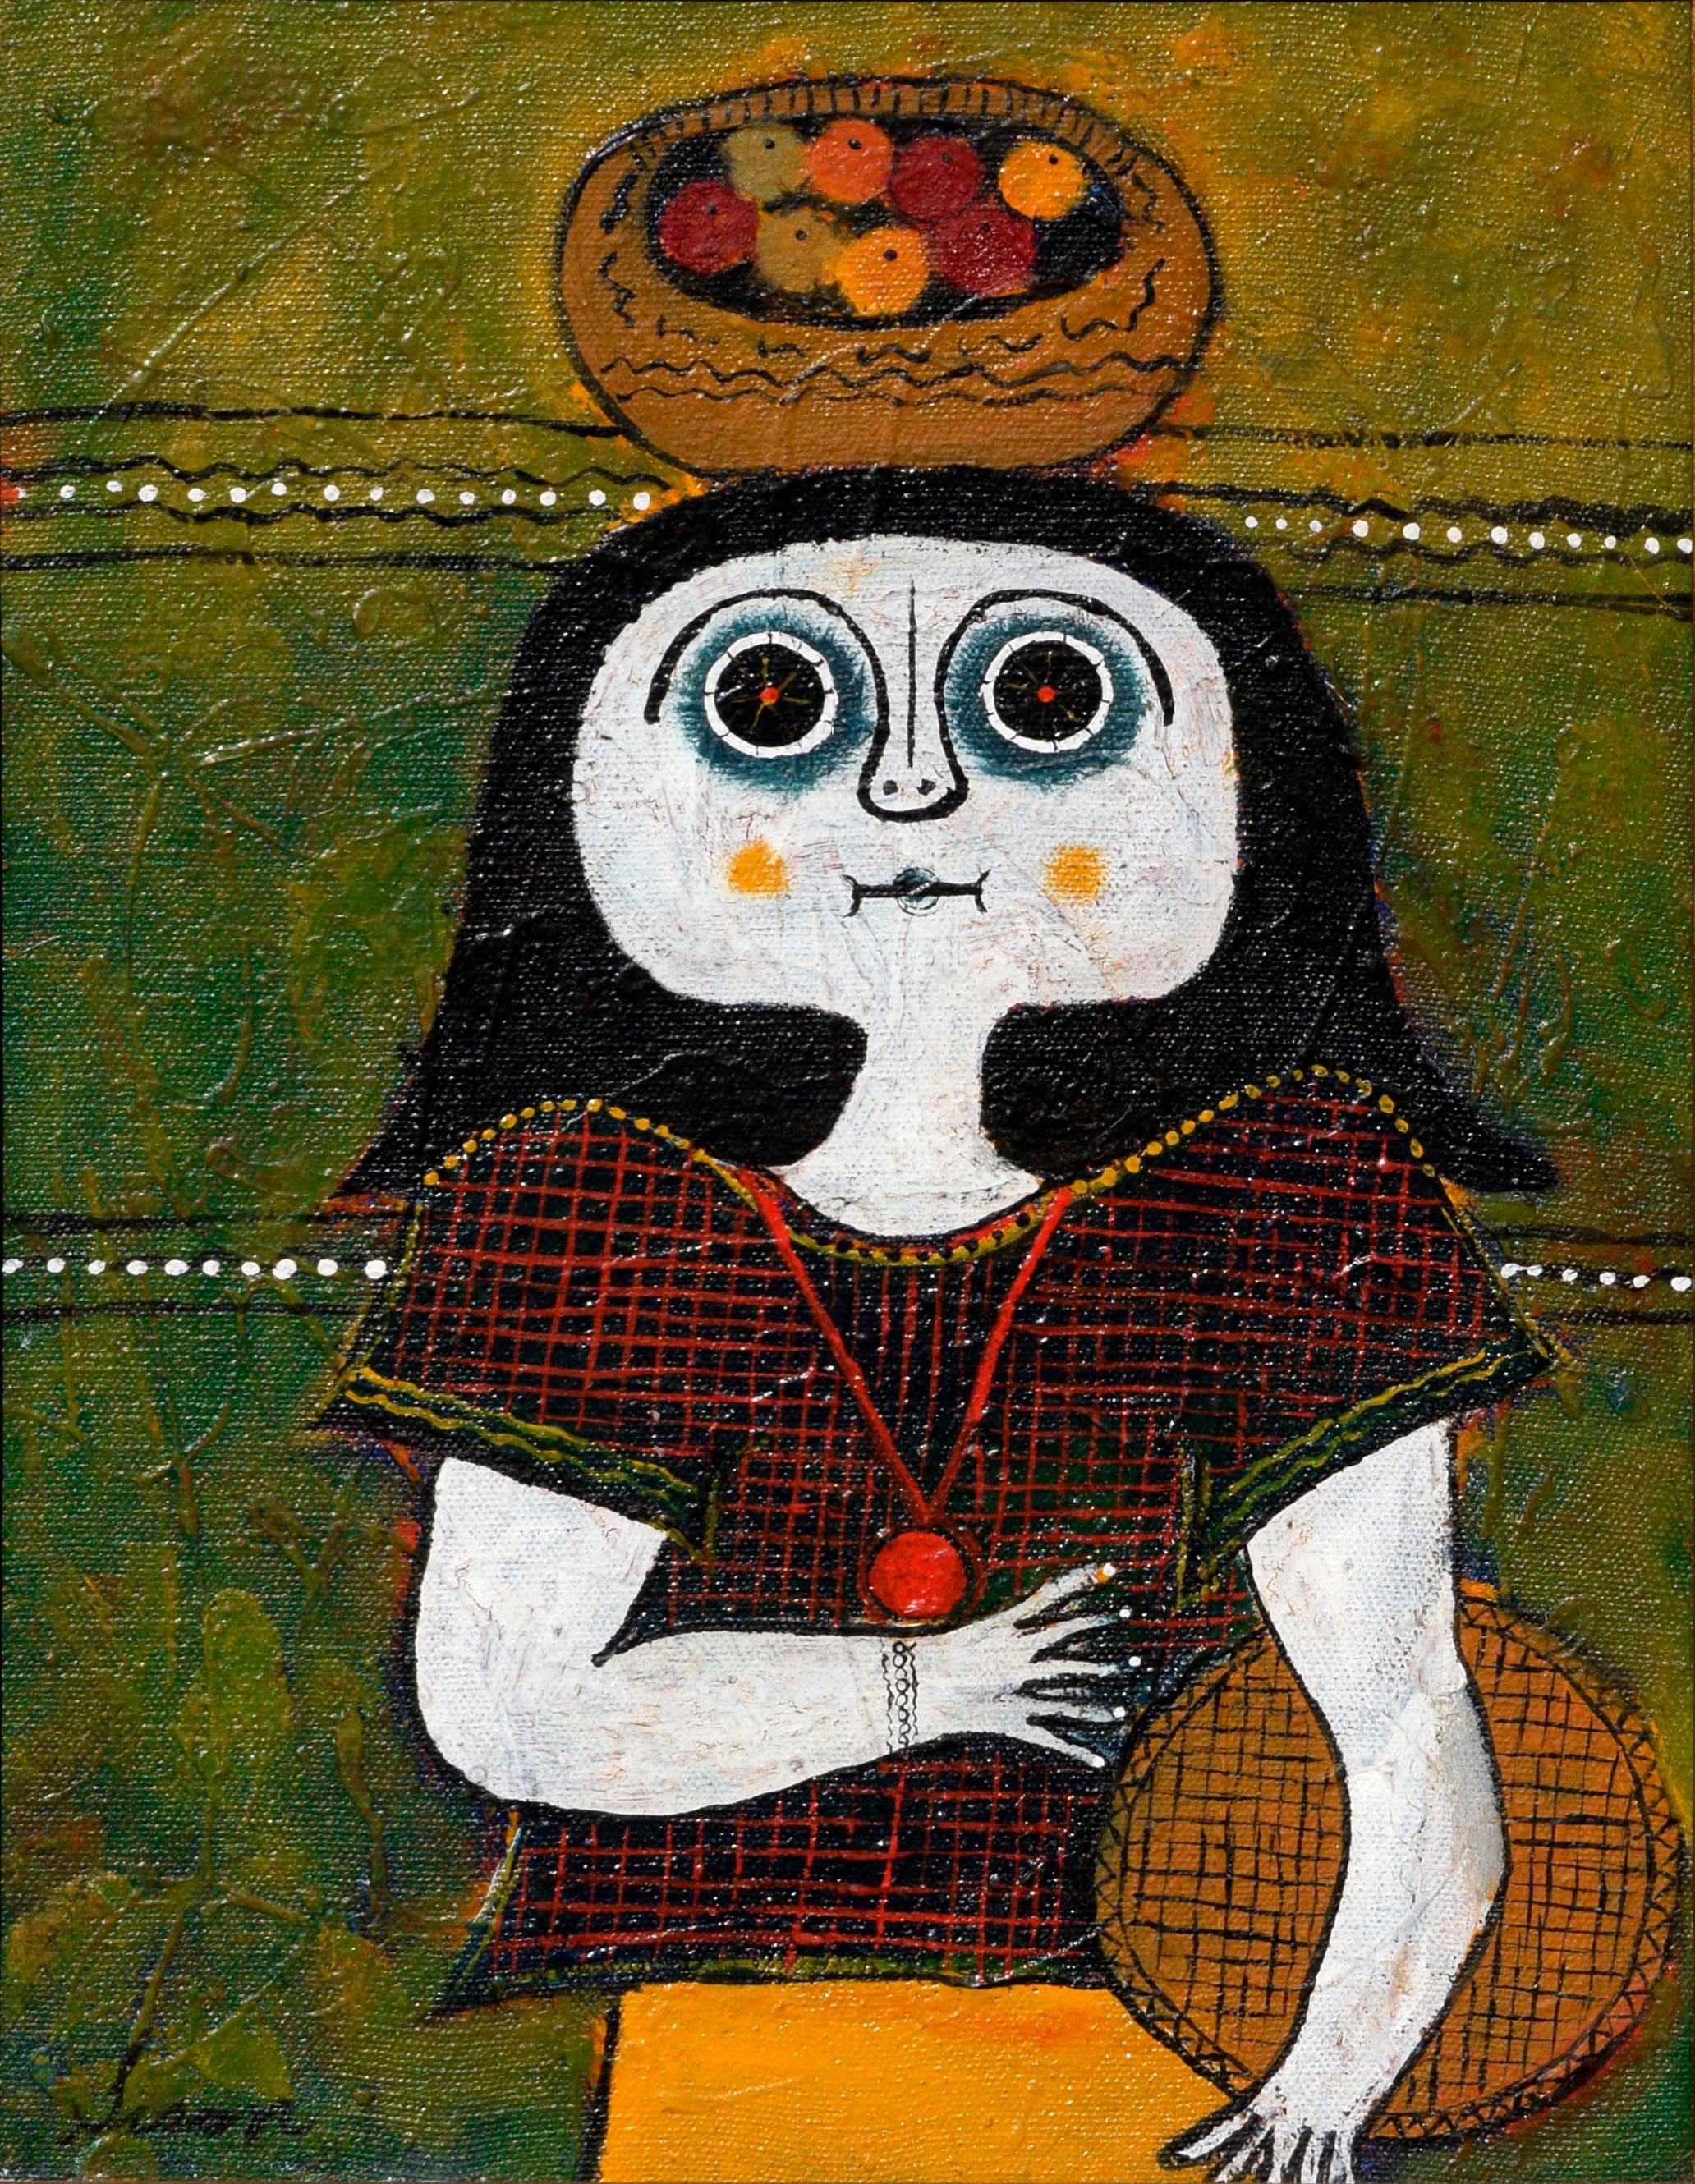 Dazed and Confused at the Market - Folk Art Painting by Sison